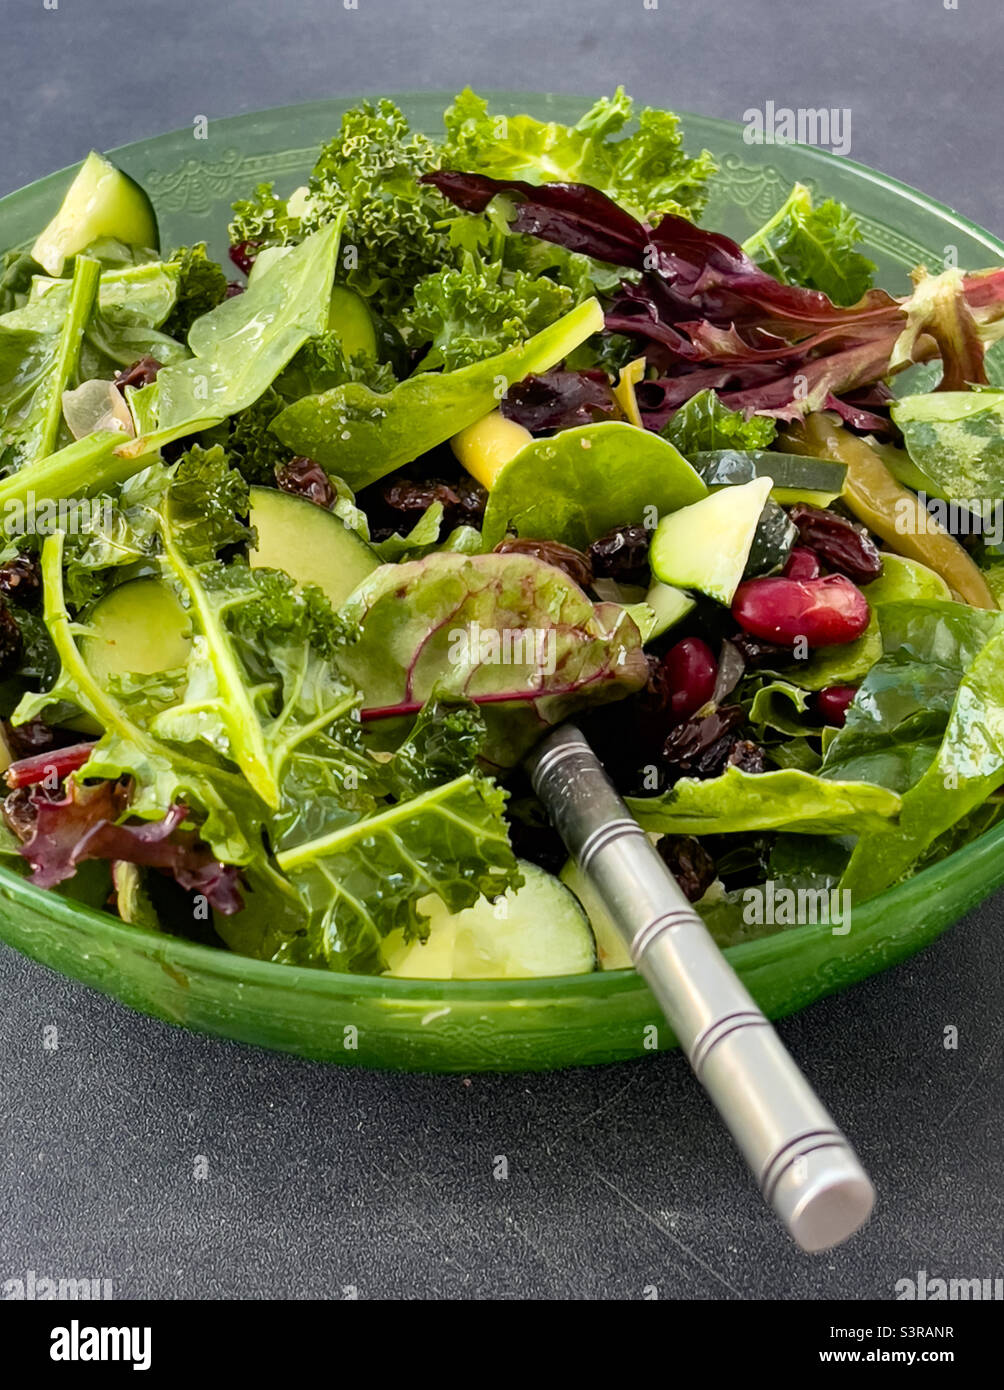 https://c8.alamy.com/comp/S3RANR/closeup-side-view-mixed-green-salad-in-green-glass-bowl-with-inserted-fork-S3RANR.jpg